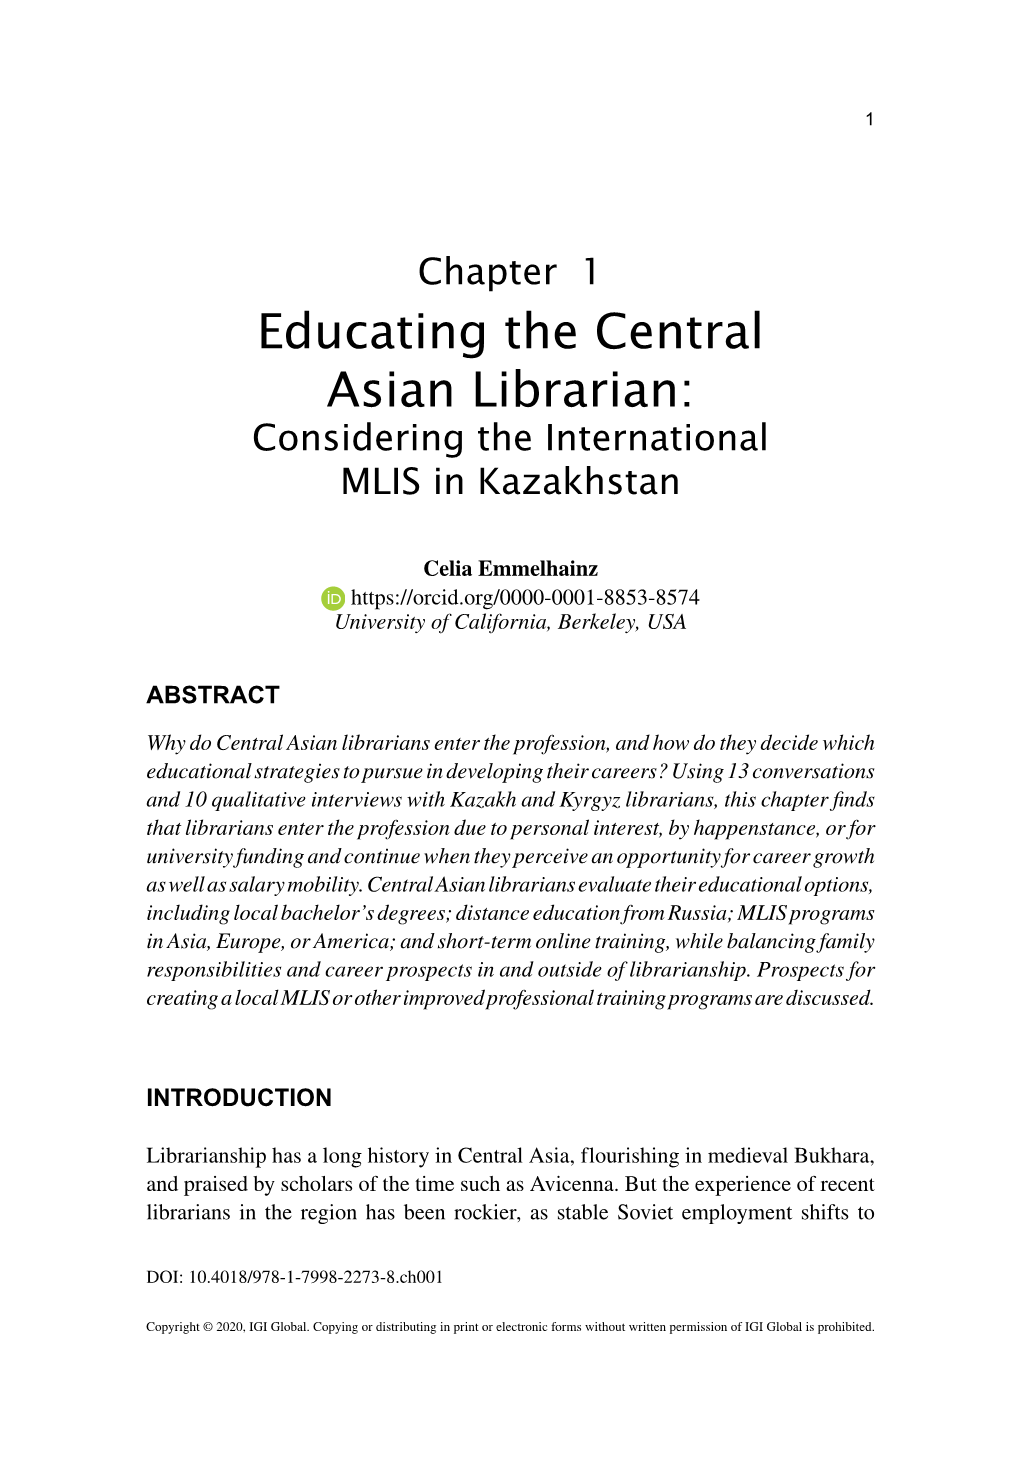 Educating the Central Asian Librarian: Considering the International MLIS in Kazakhstan